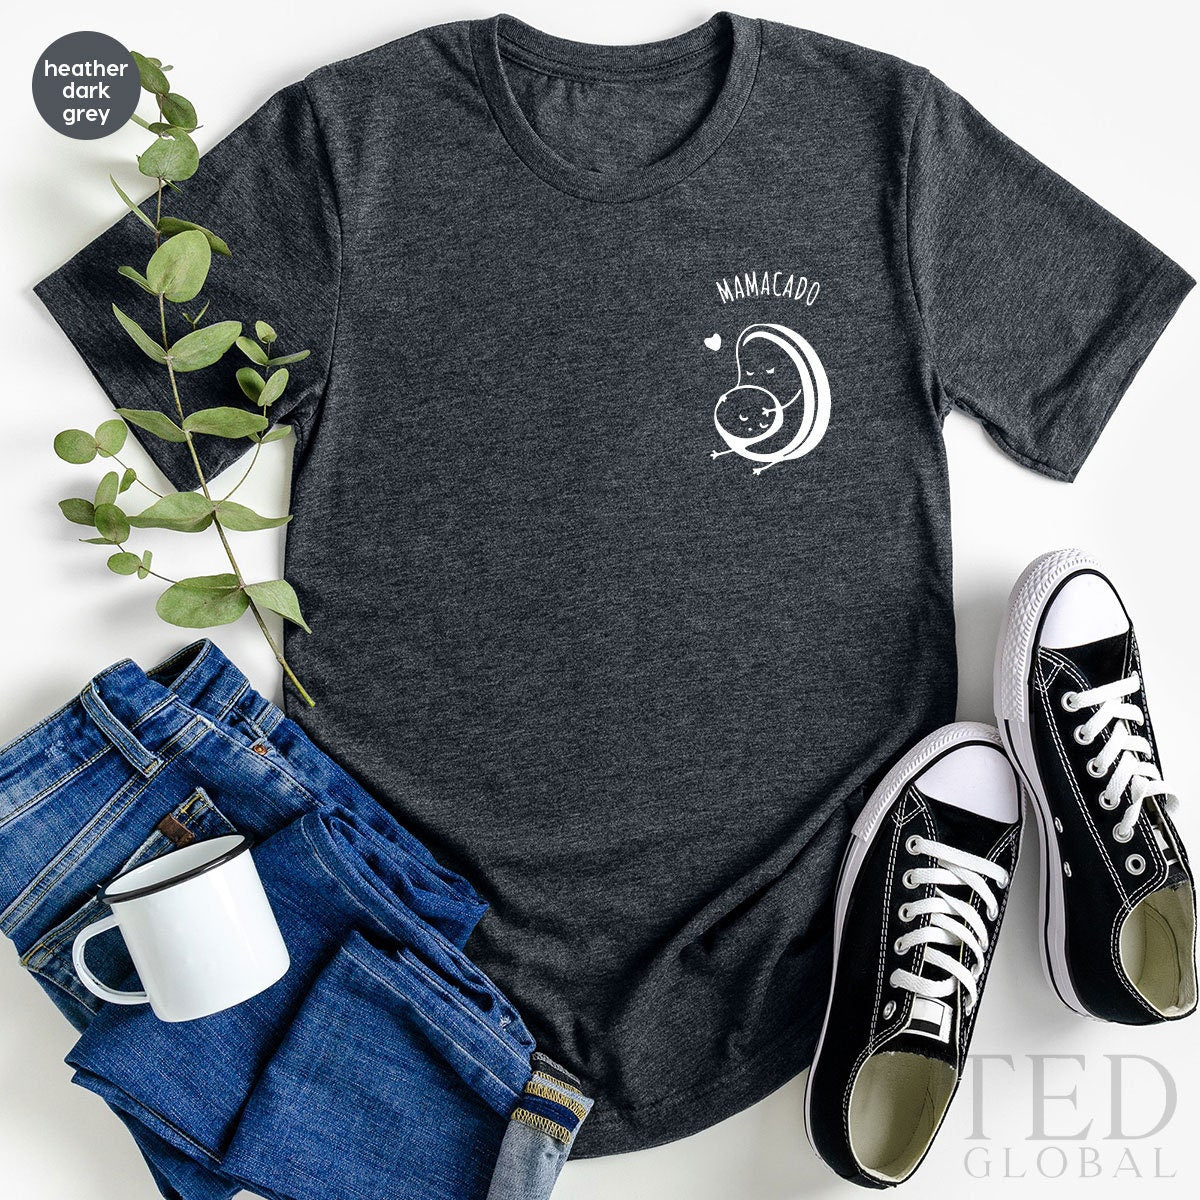 Pregnant Gift, New Mom T Shirt, Pregnancy Announcement Shirt, Maternity TShirt, Mamacado Tee, Expecting Mom Gift, Pregnancy Reveal Husband - Fastdeliverytees.com